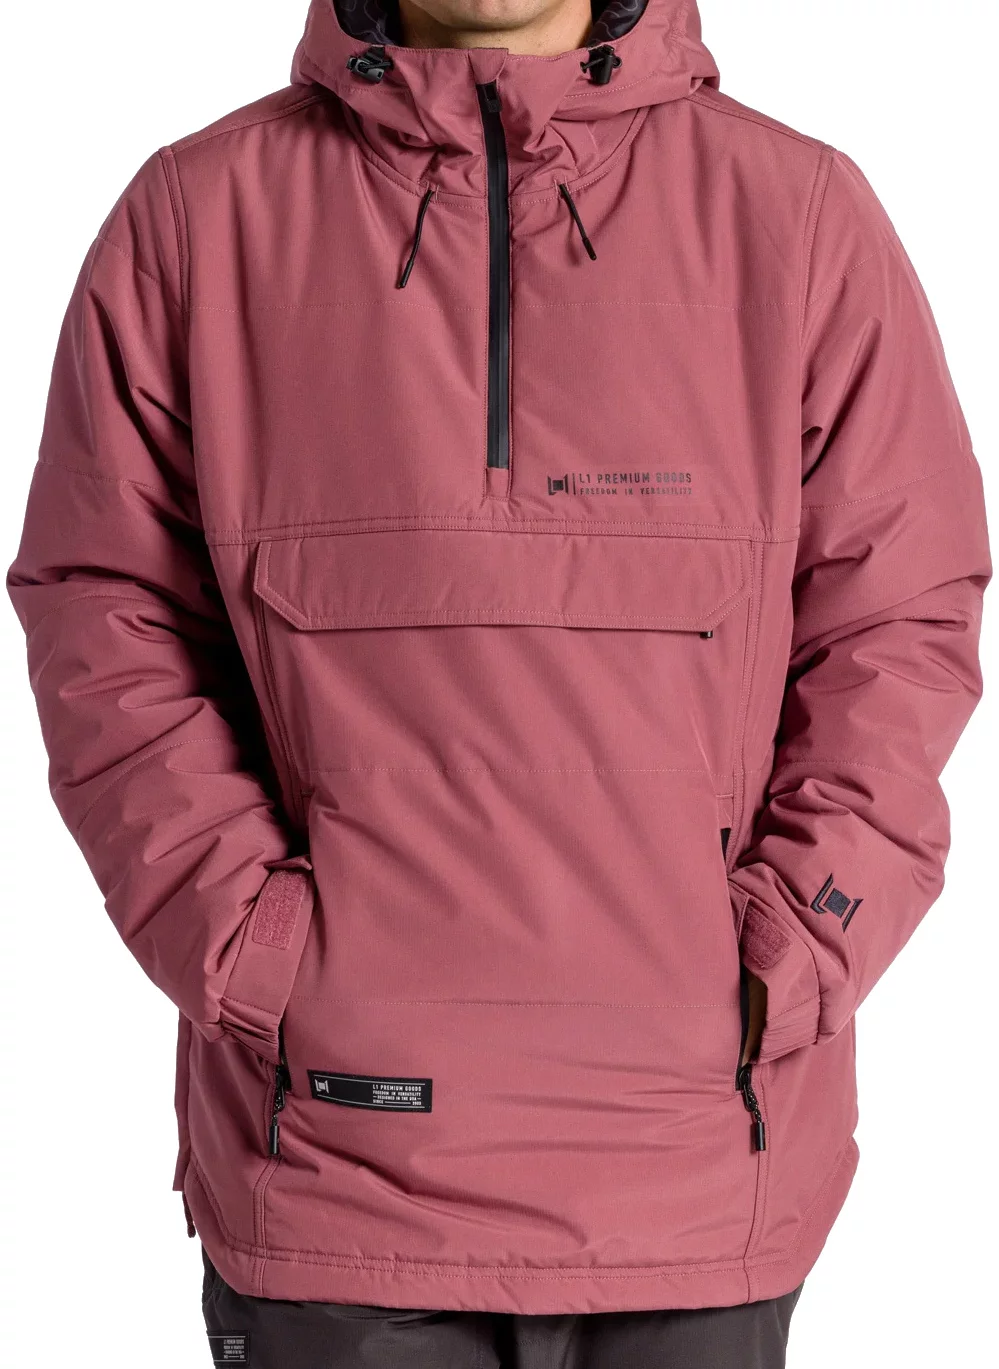 Aftershock Insulated Jacket (Closeout)